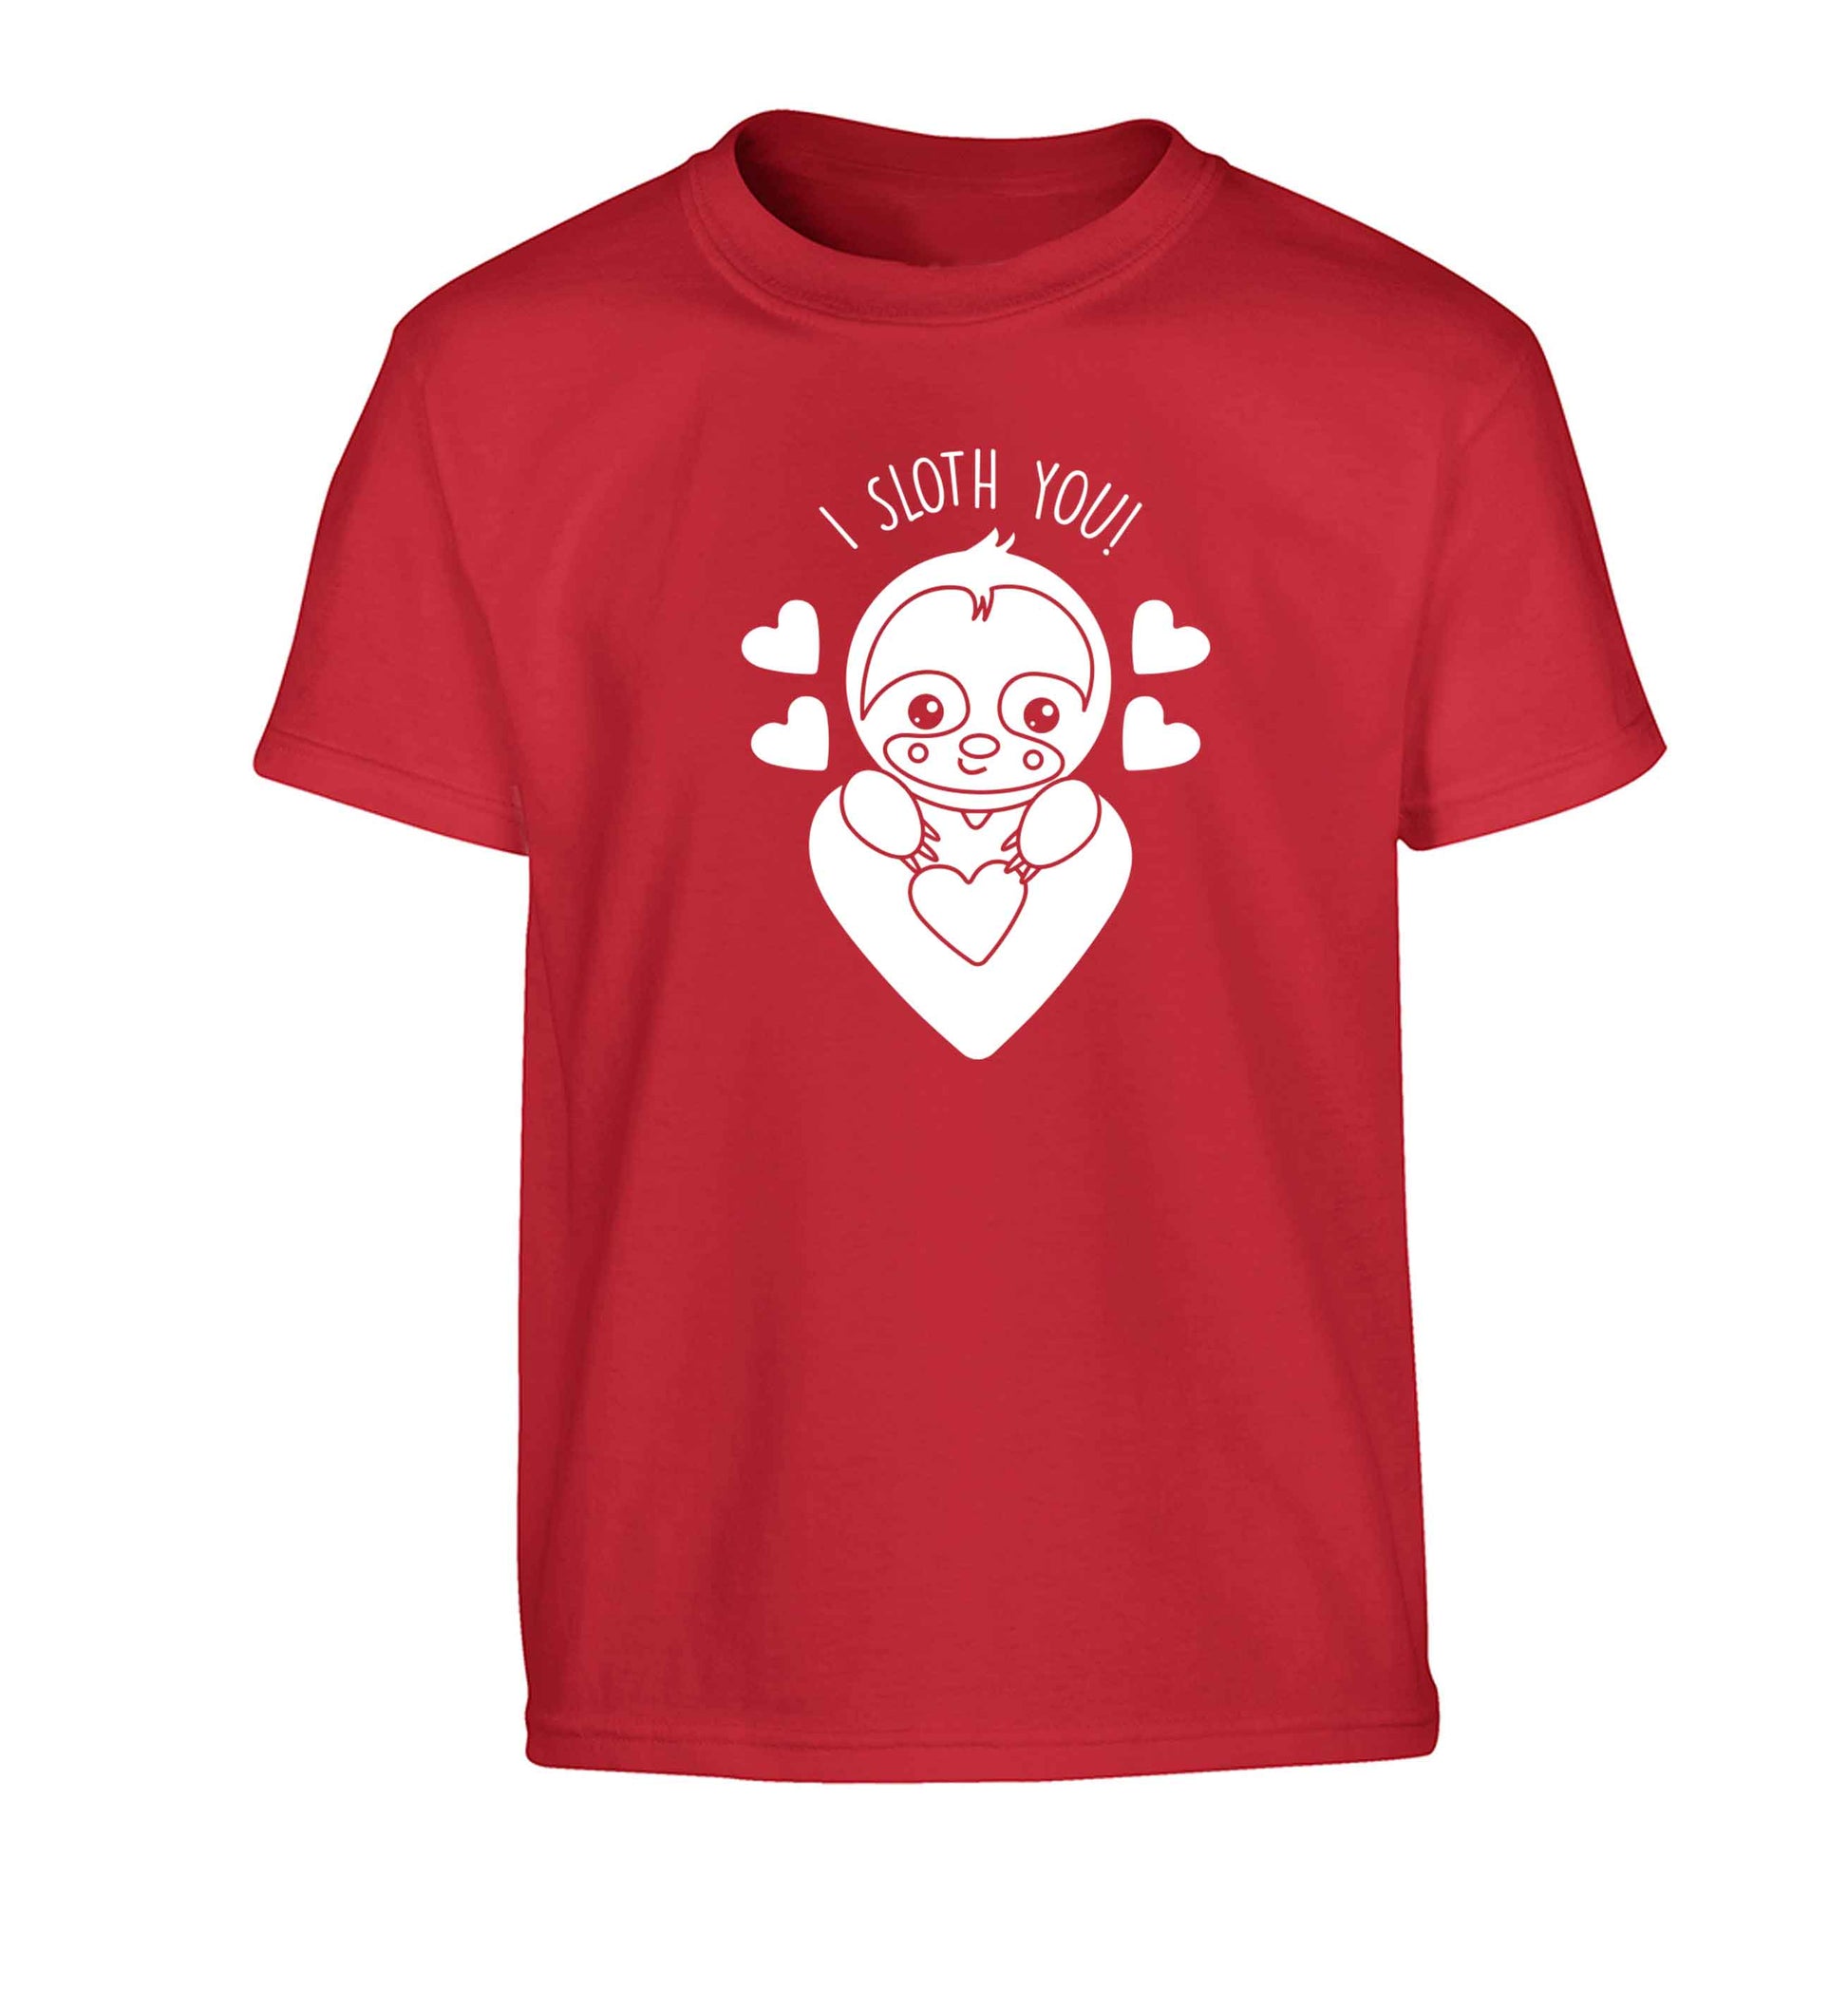 I sloth you Children's red Tshirt 12-13 Years